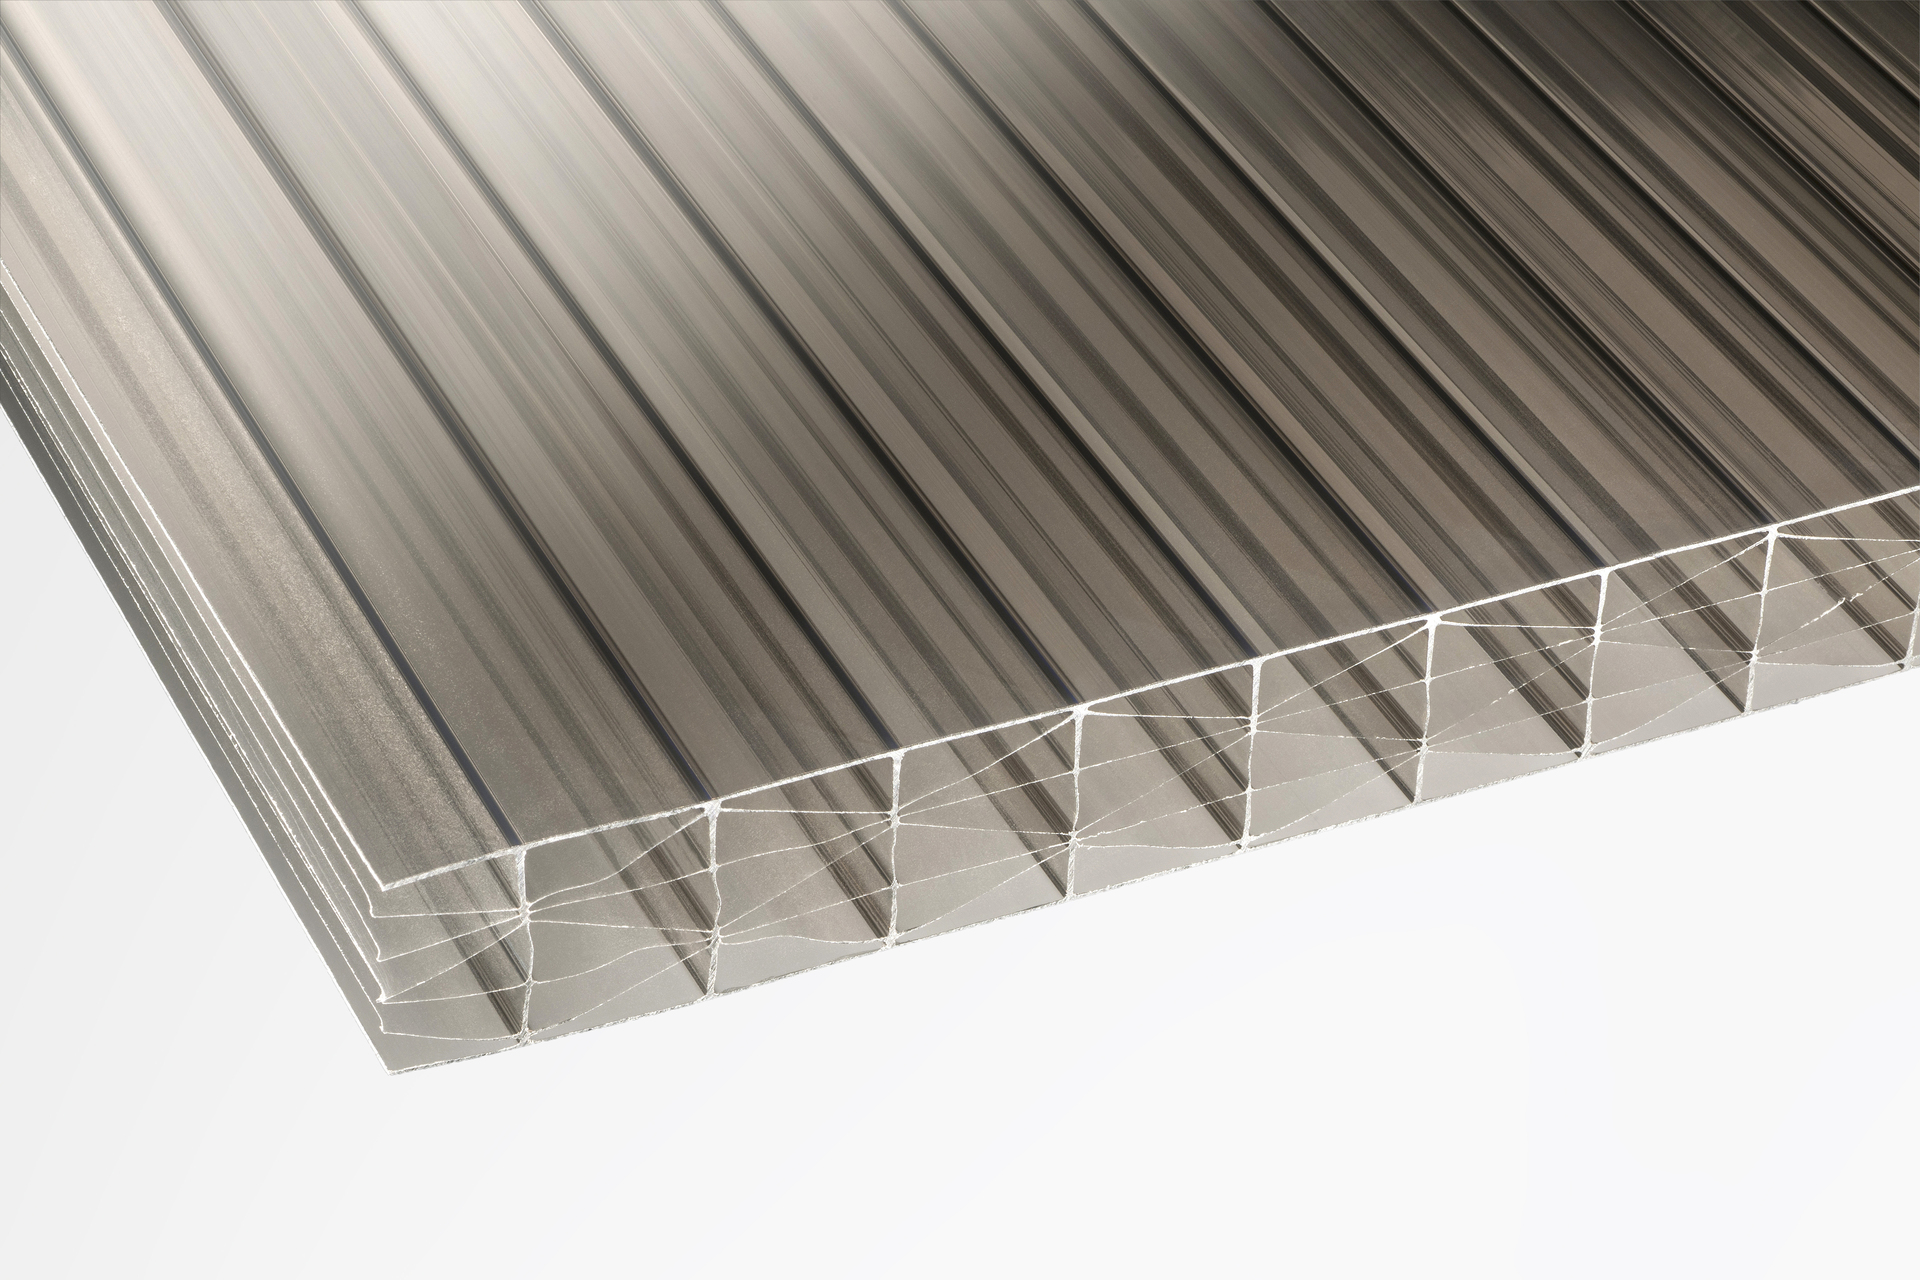 Image of 25mm Bronze Multiwall Polycarbonate Sheet - 2500 x 800mm